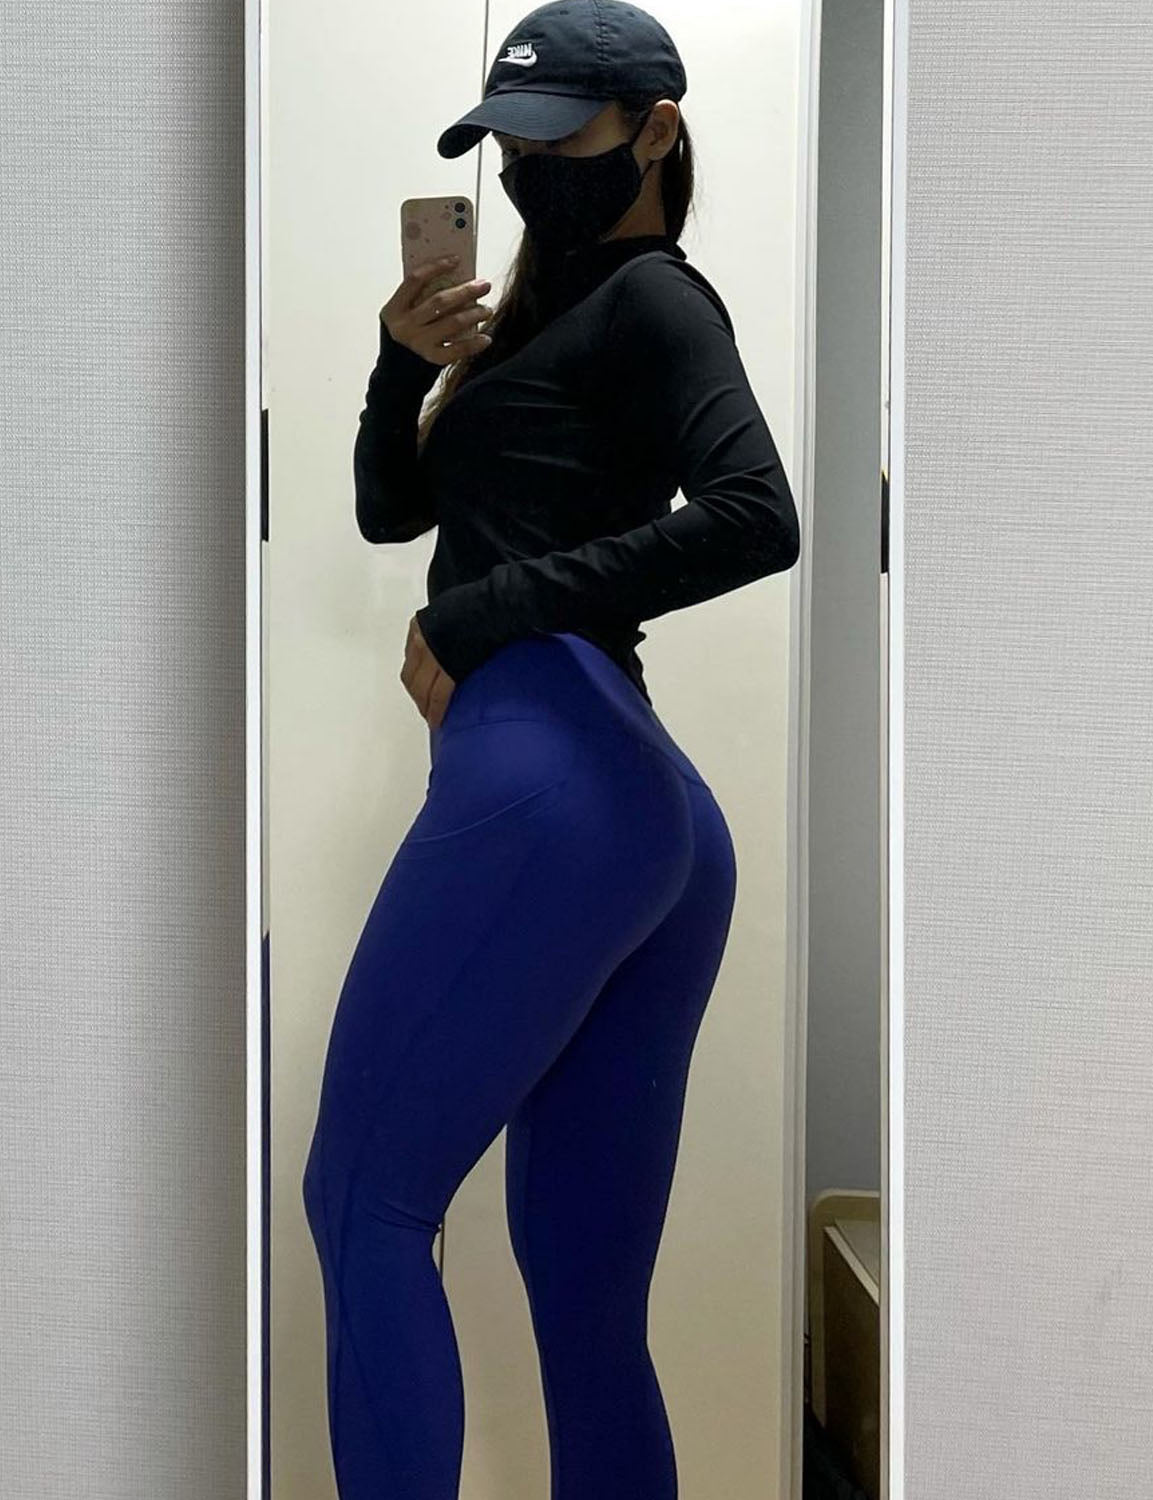 High Waist Side Pockets Running Pants navy 75% Nylon, 25% Spandex Fabric doesn't attract lint easily 4-way stretch No see-through Moisture-wicking Tummy control Inner pocket